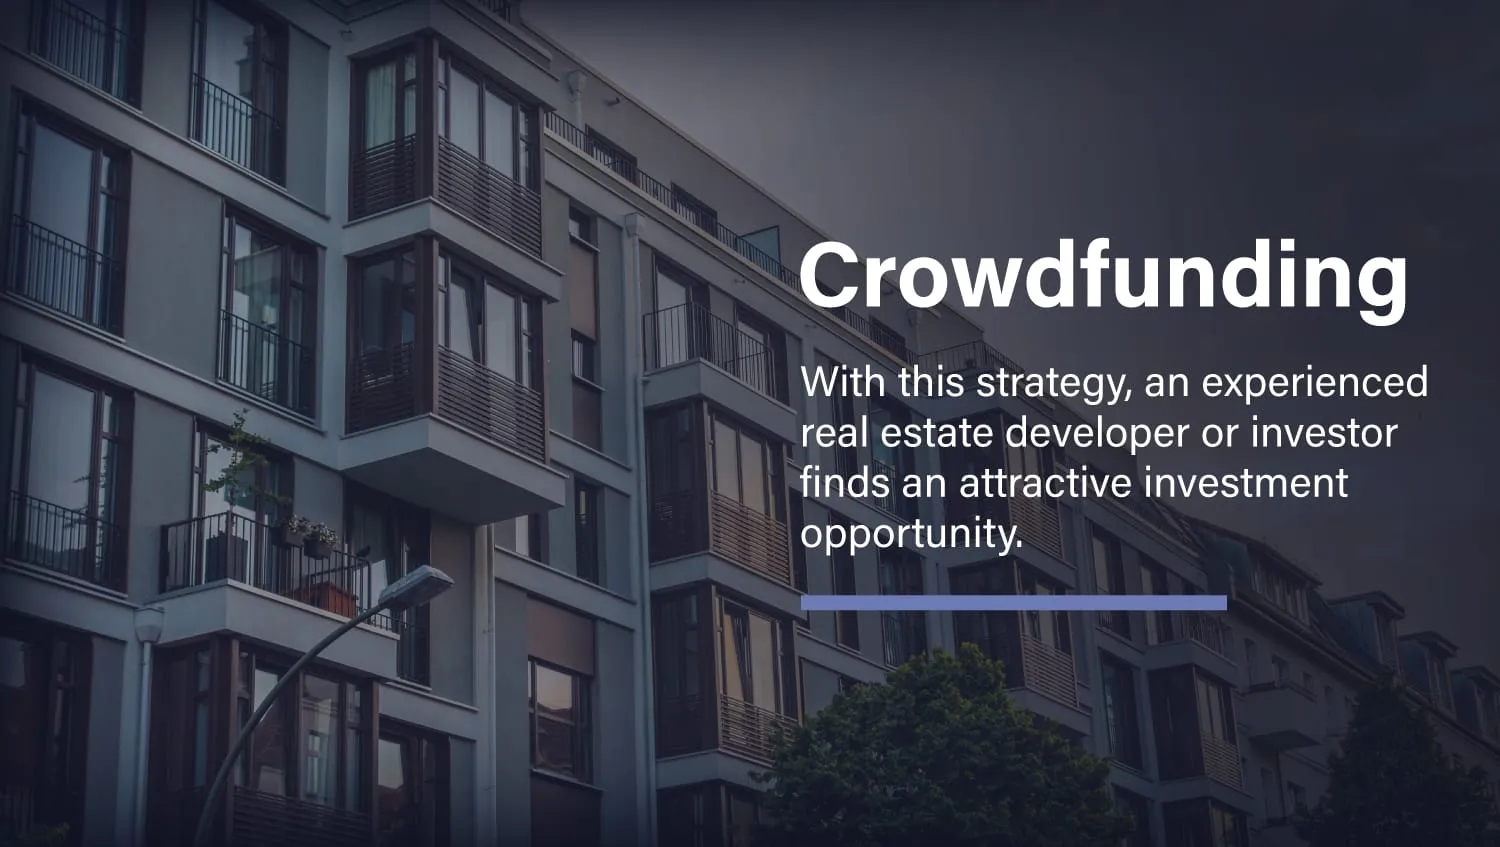 Real Estate Crowdfunding definition poster